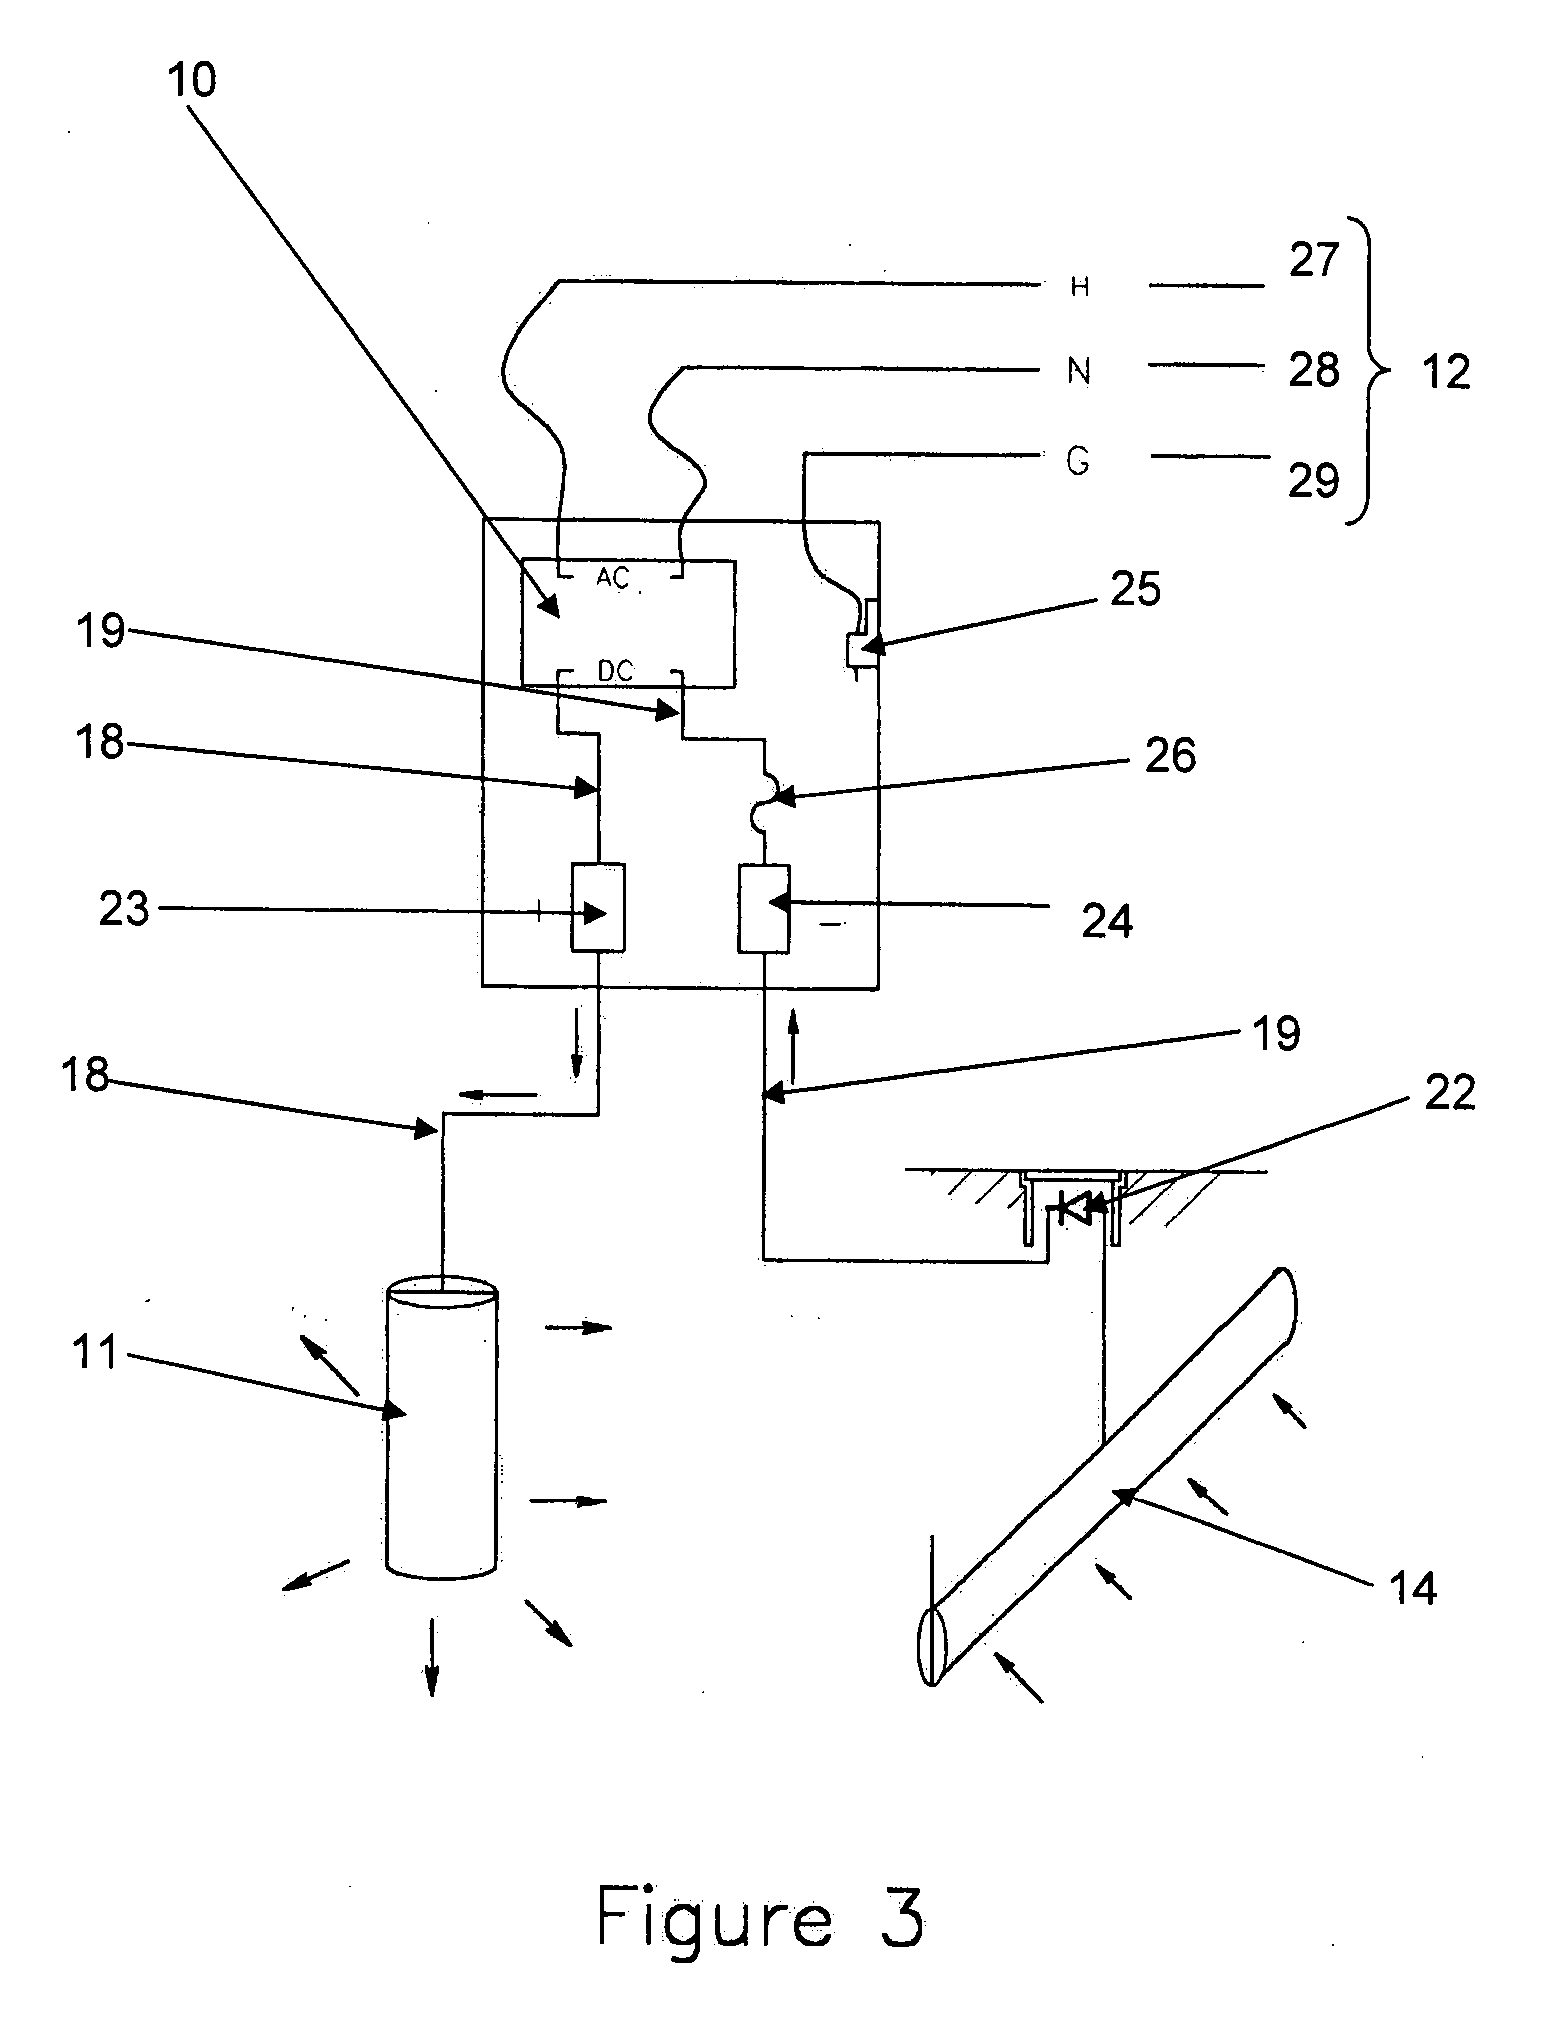 Cathodic protection system for non-isolated structures including a microprocessor control